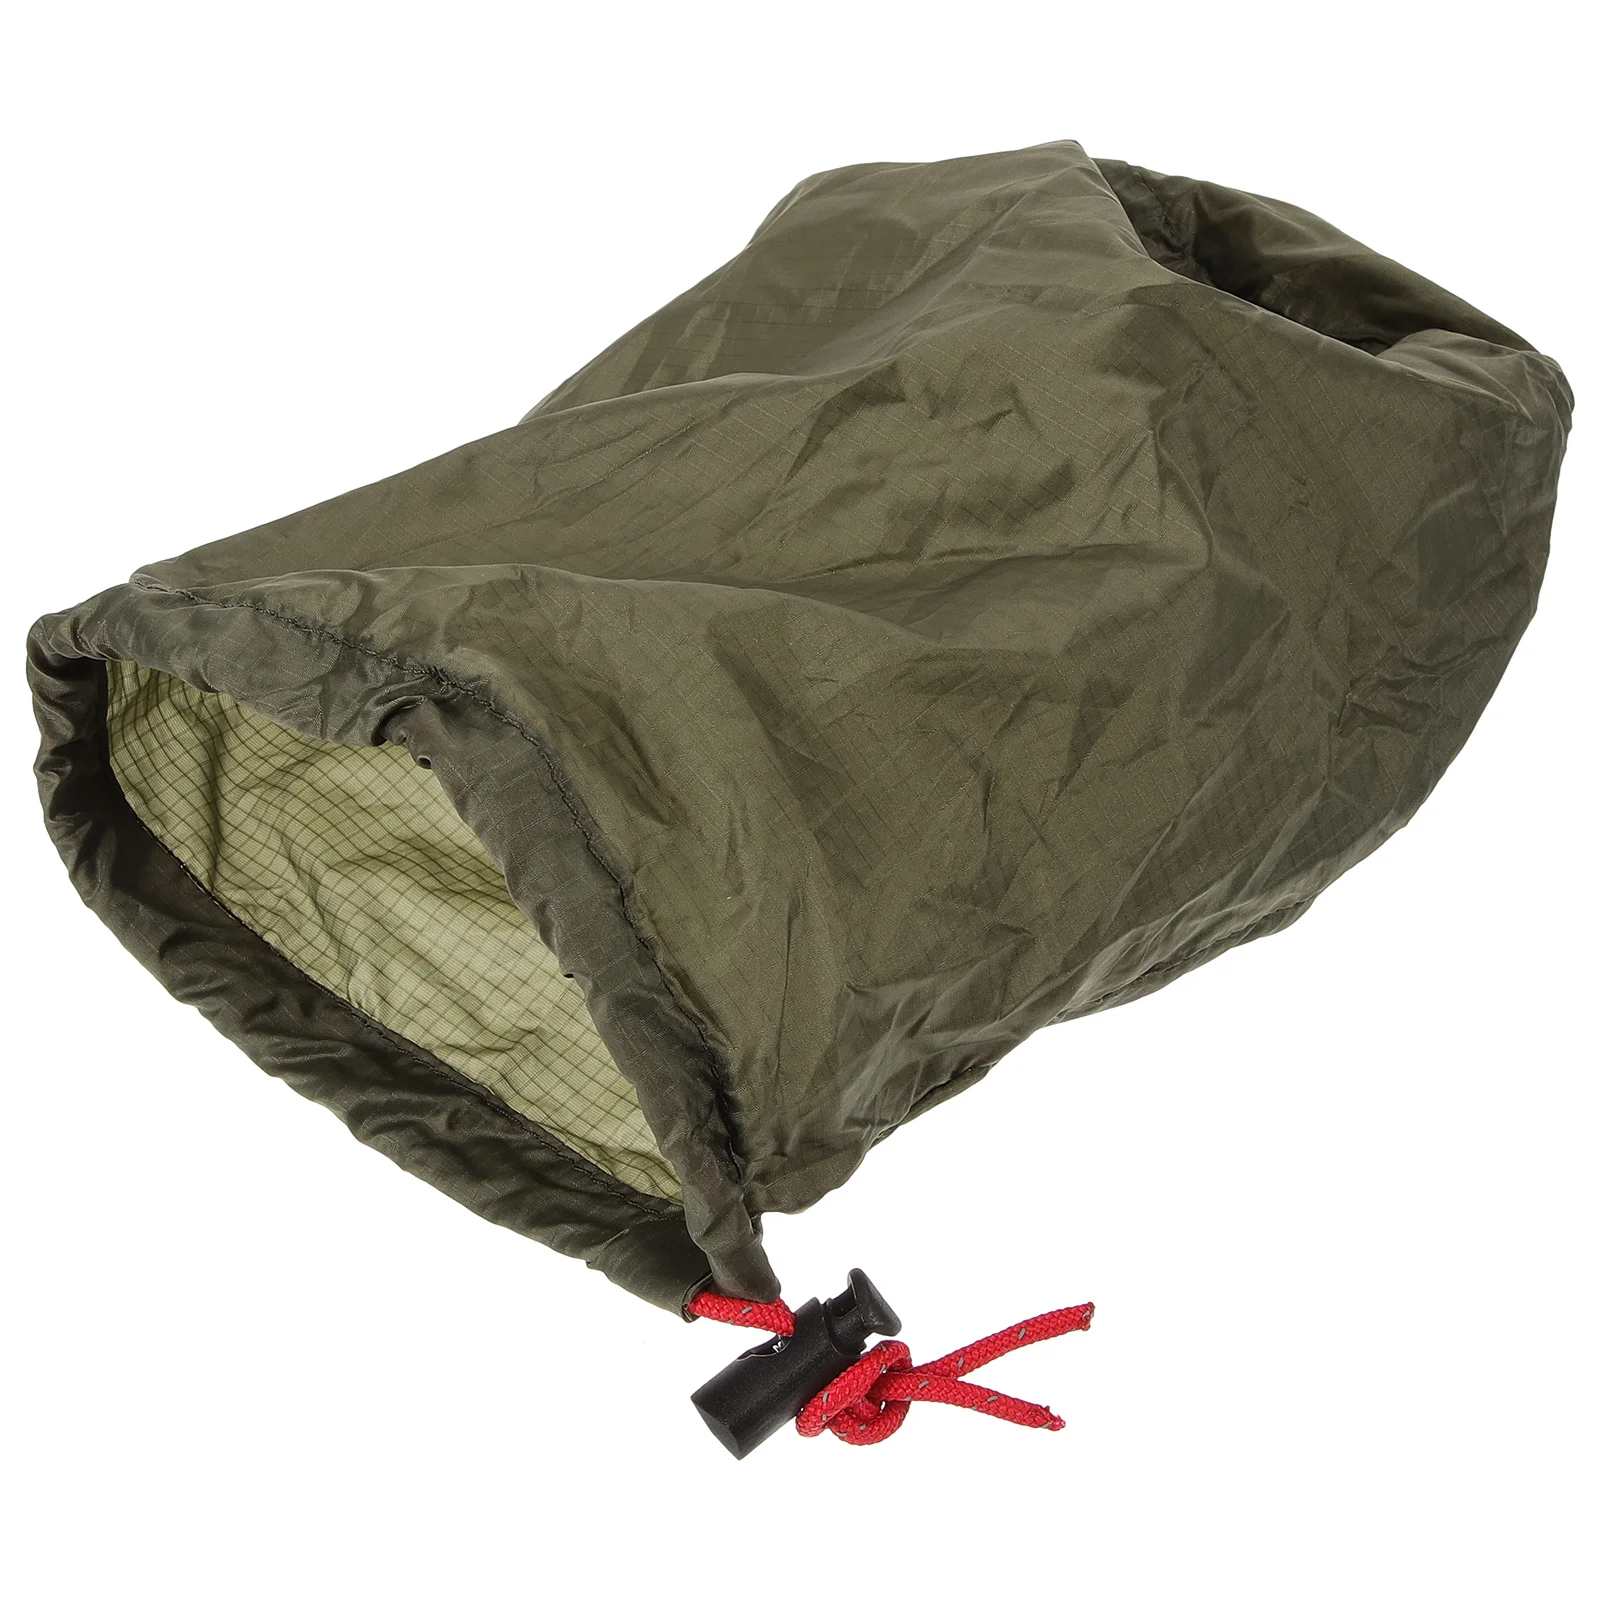 

Sleeping Bag Compression Clothes Storage Stuff Sack Portable Bags Container Drawstring Nylon Sundries Travel